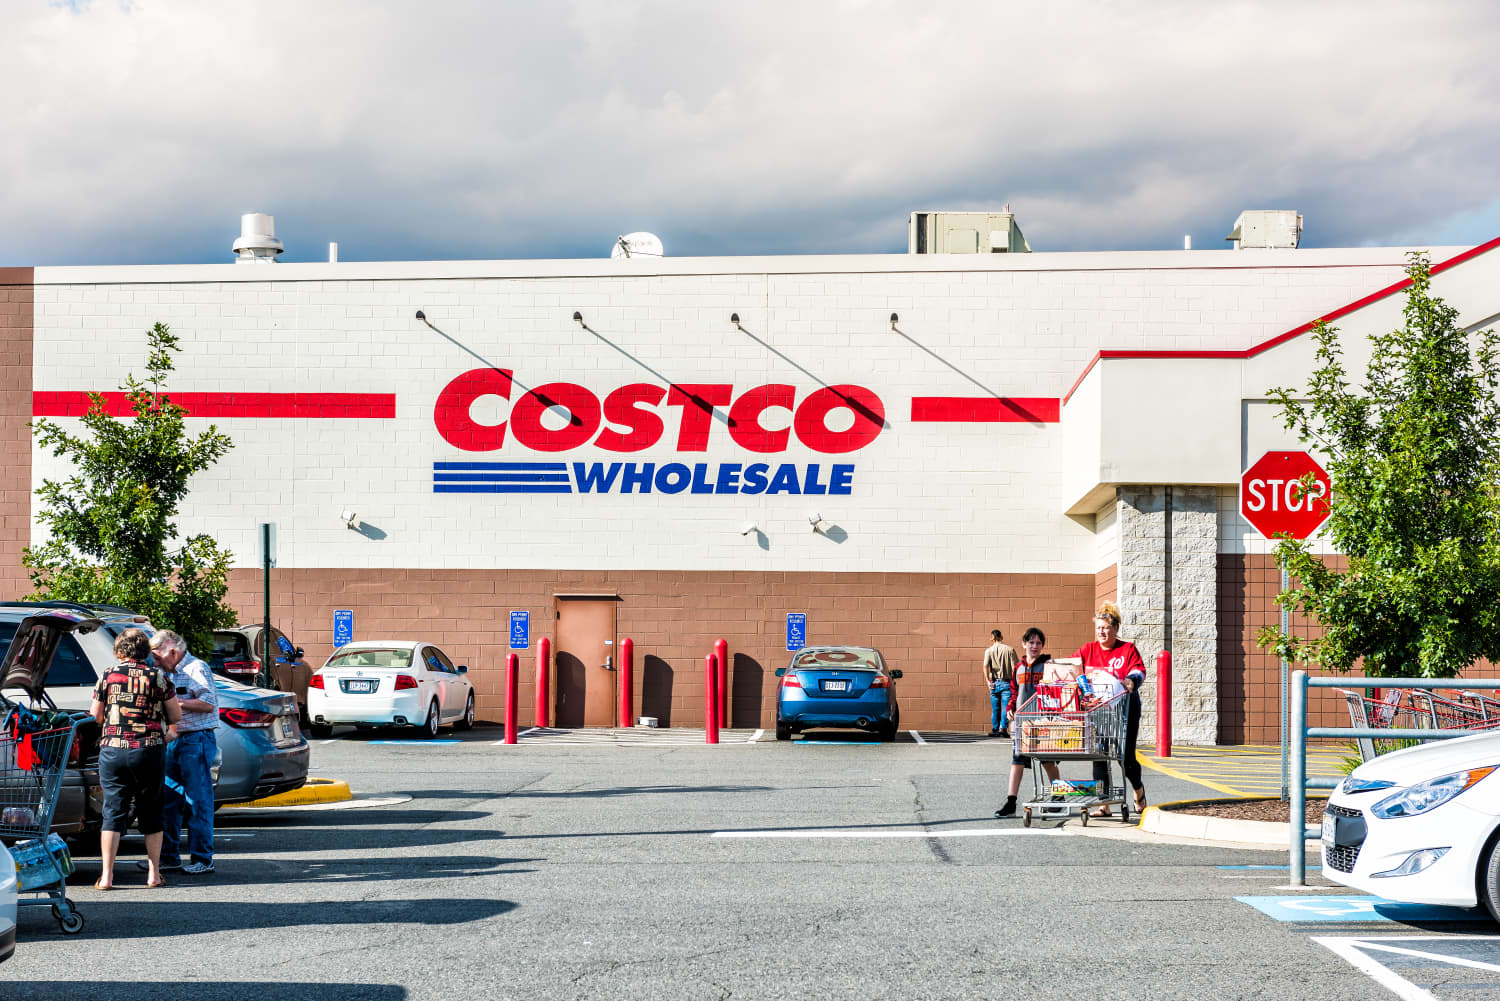 10 Costco Groceries I’m Buying for Easy School Lunches